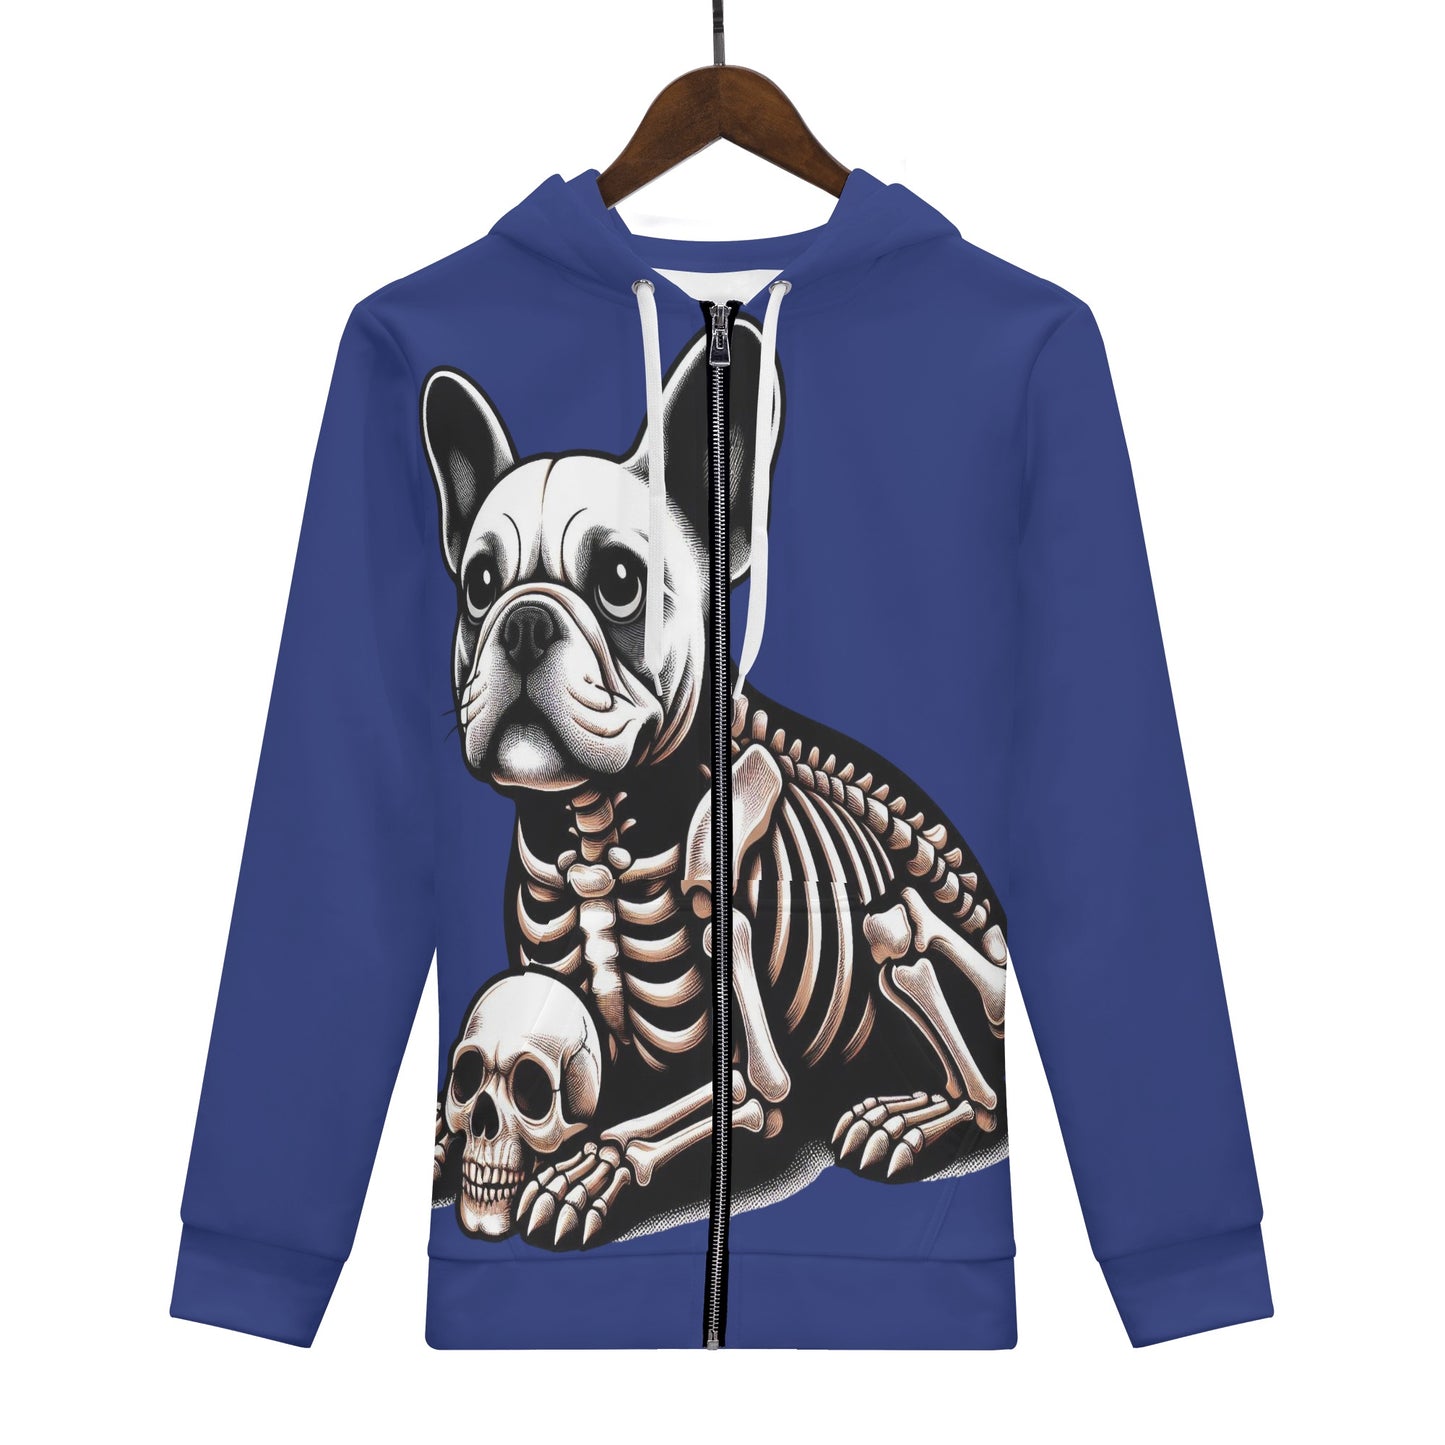 Ace - All Over Print Zip Up Hoodie